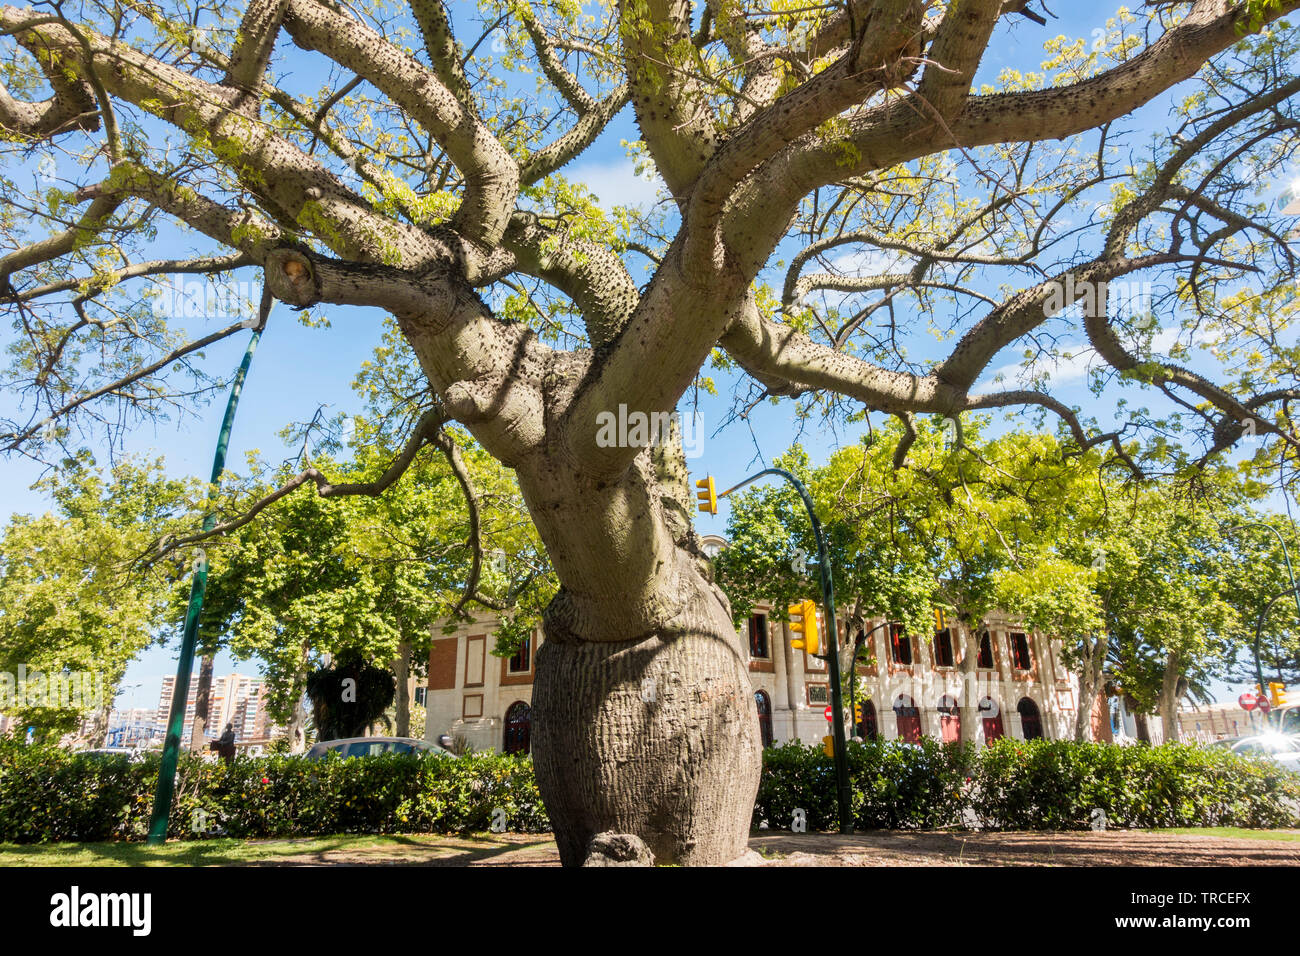 Big Floss Silk Tree In Spring Ceiba Chodatii In Park In Malaga Andalusia Spain Stock Photo Alamy